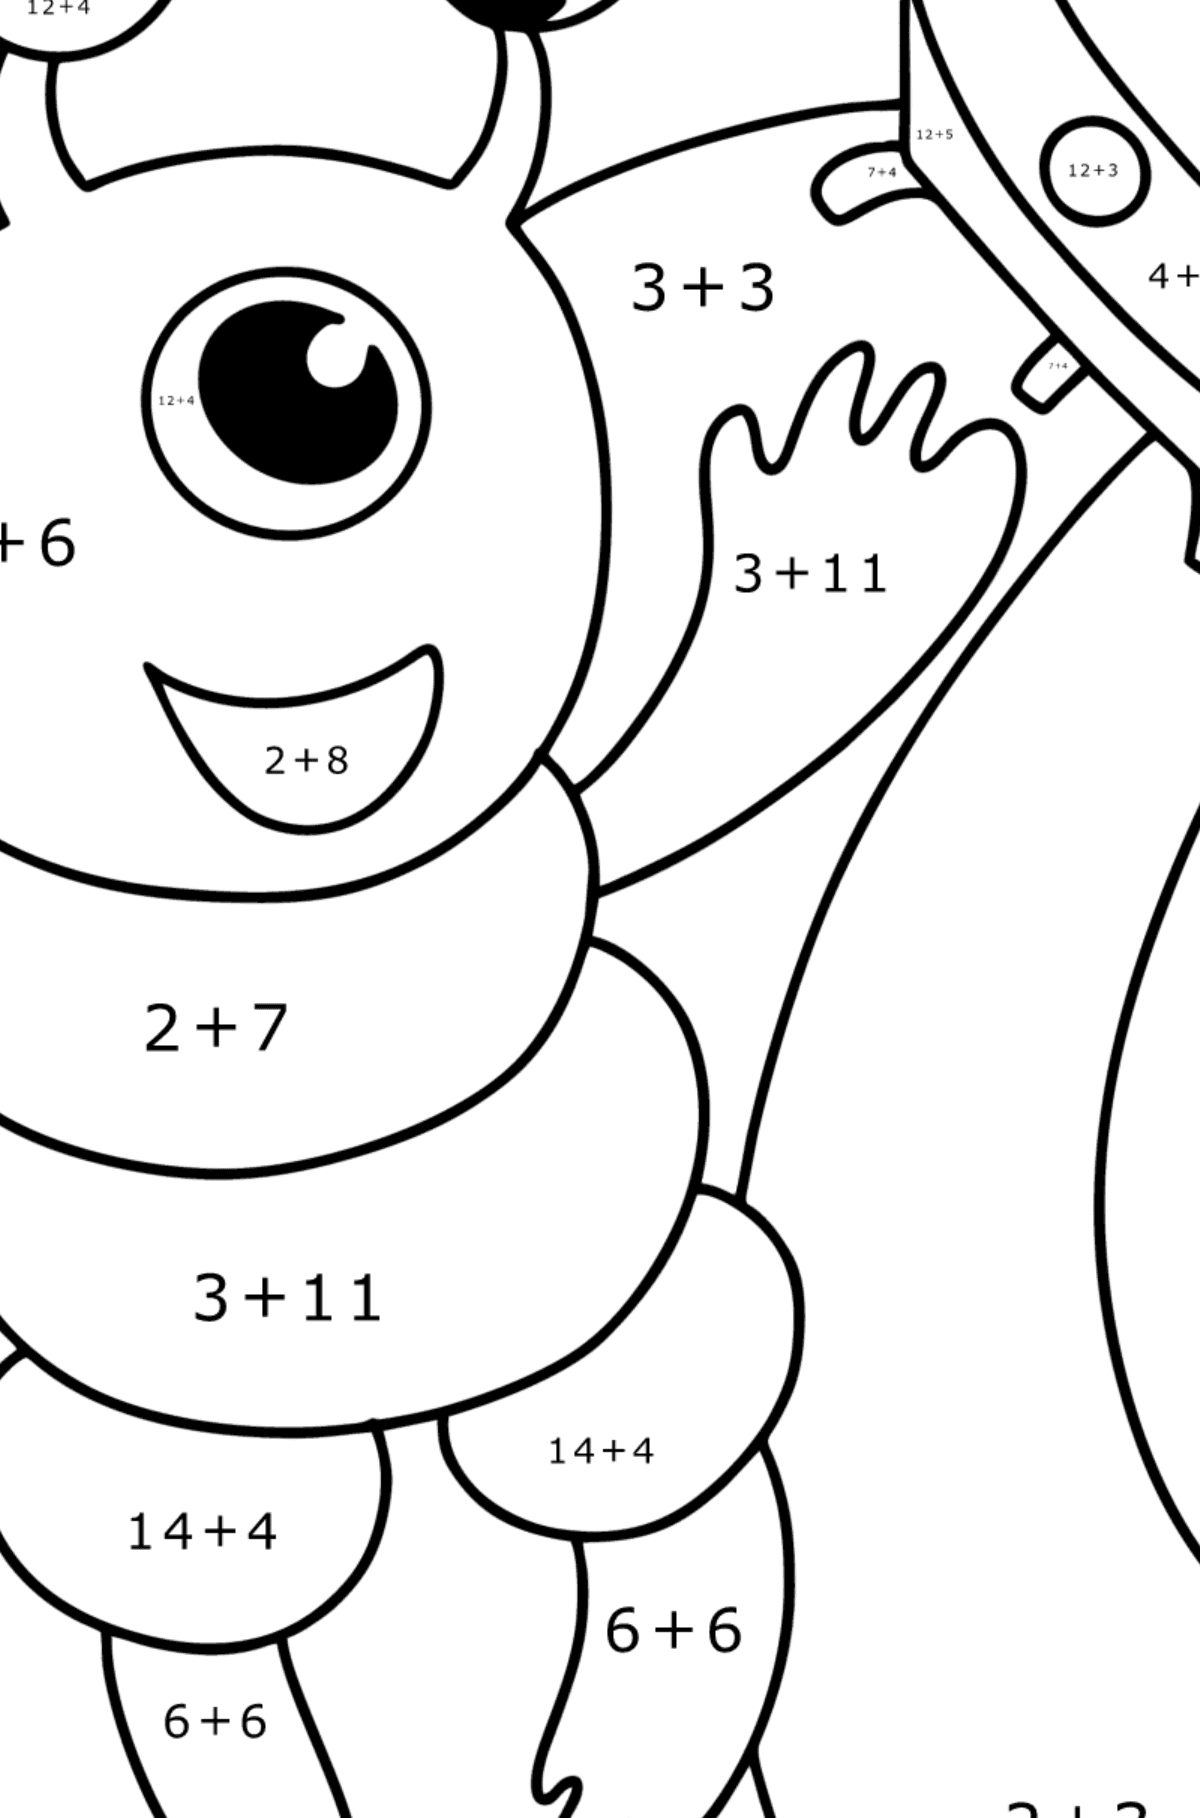 Alien in space coloring page - Math Coloring - Addition for Kids